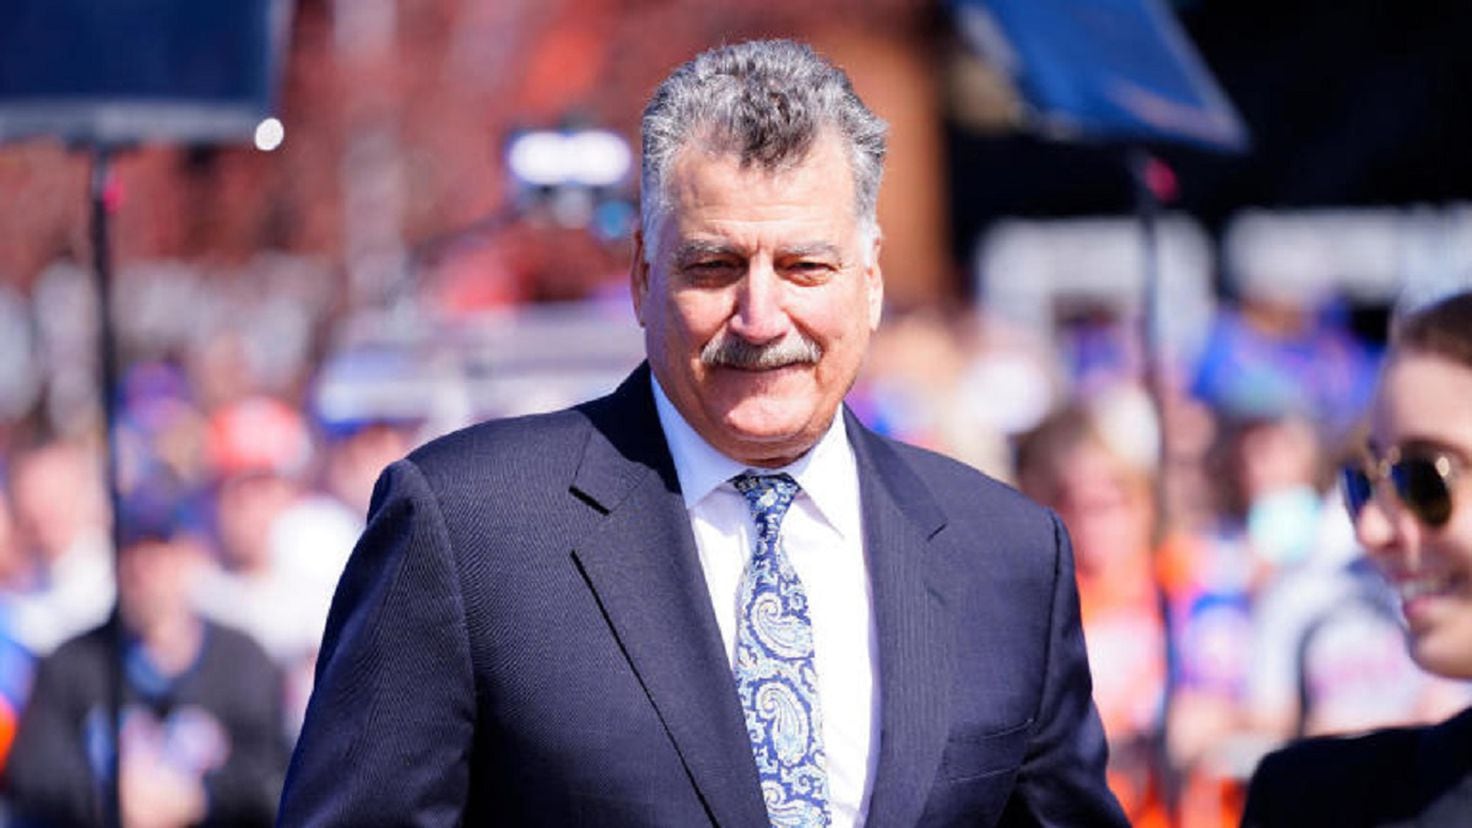 He said what? Mets' Keith Hernandez has outrageous on-air slipup